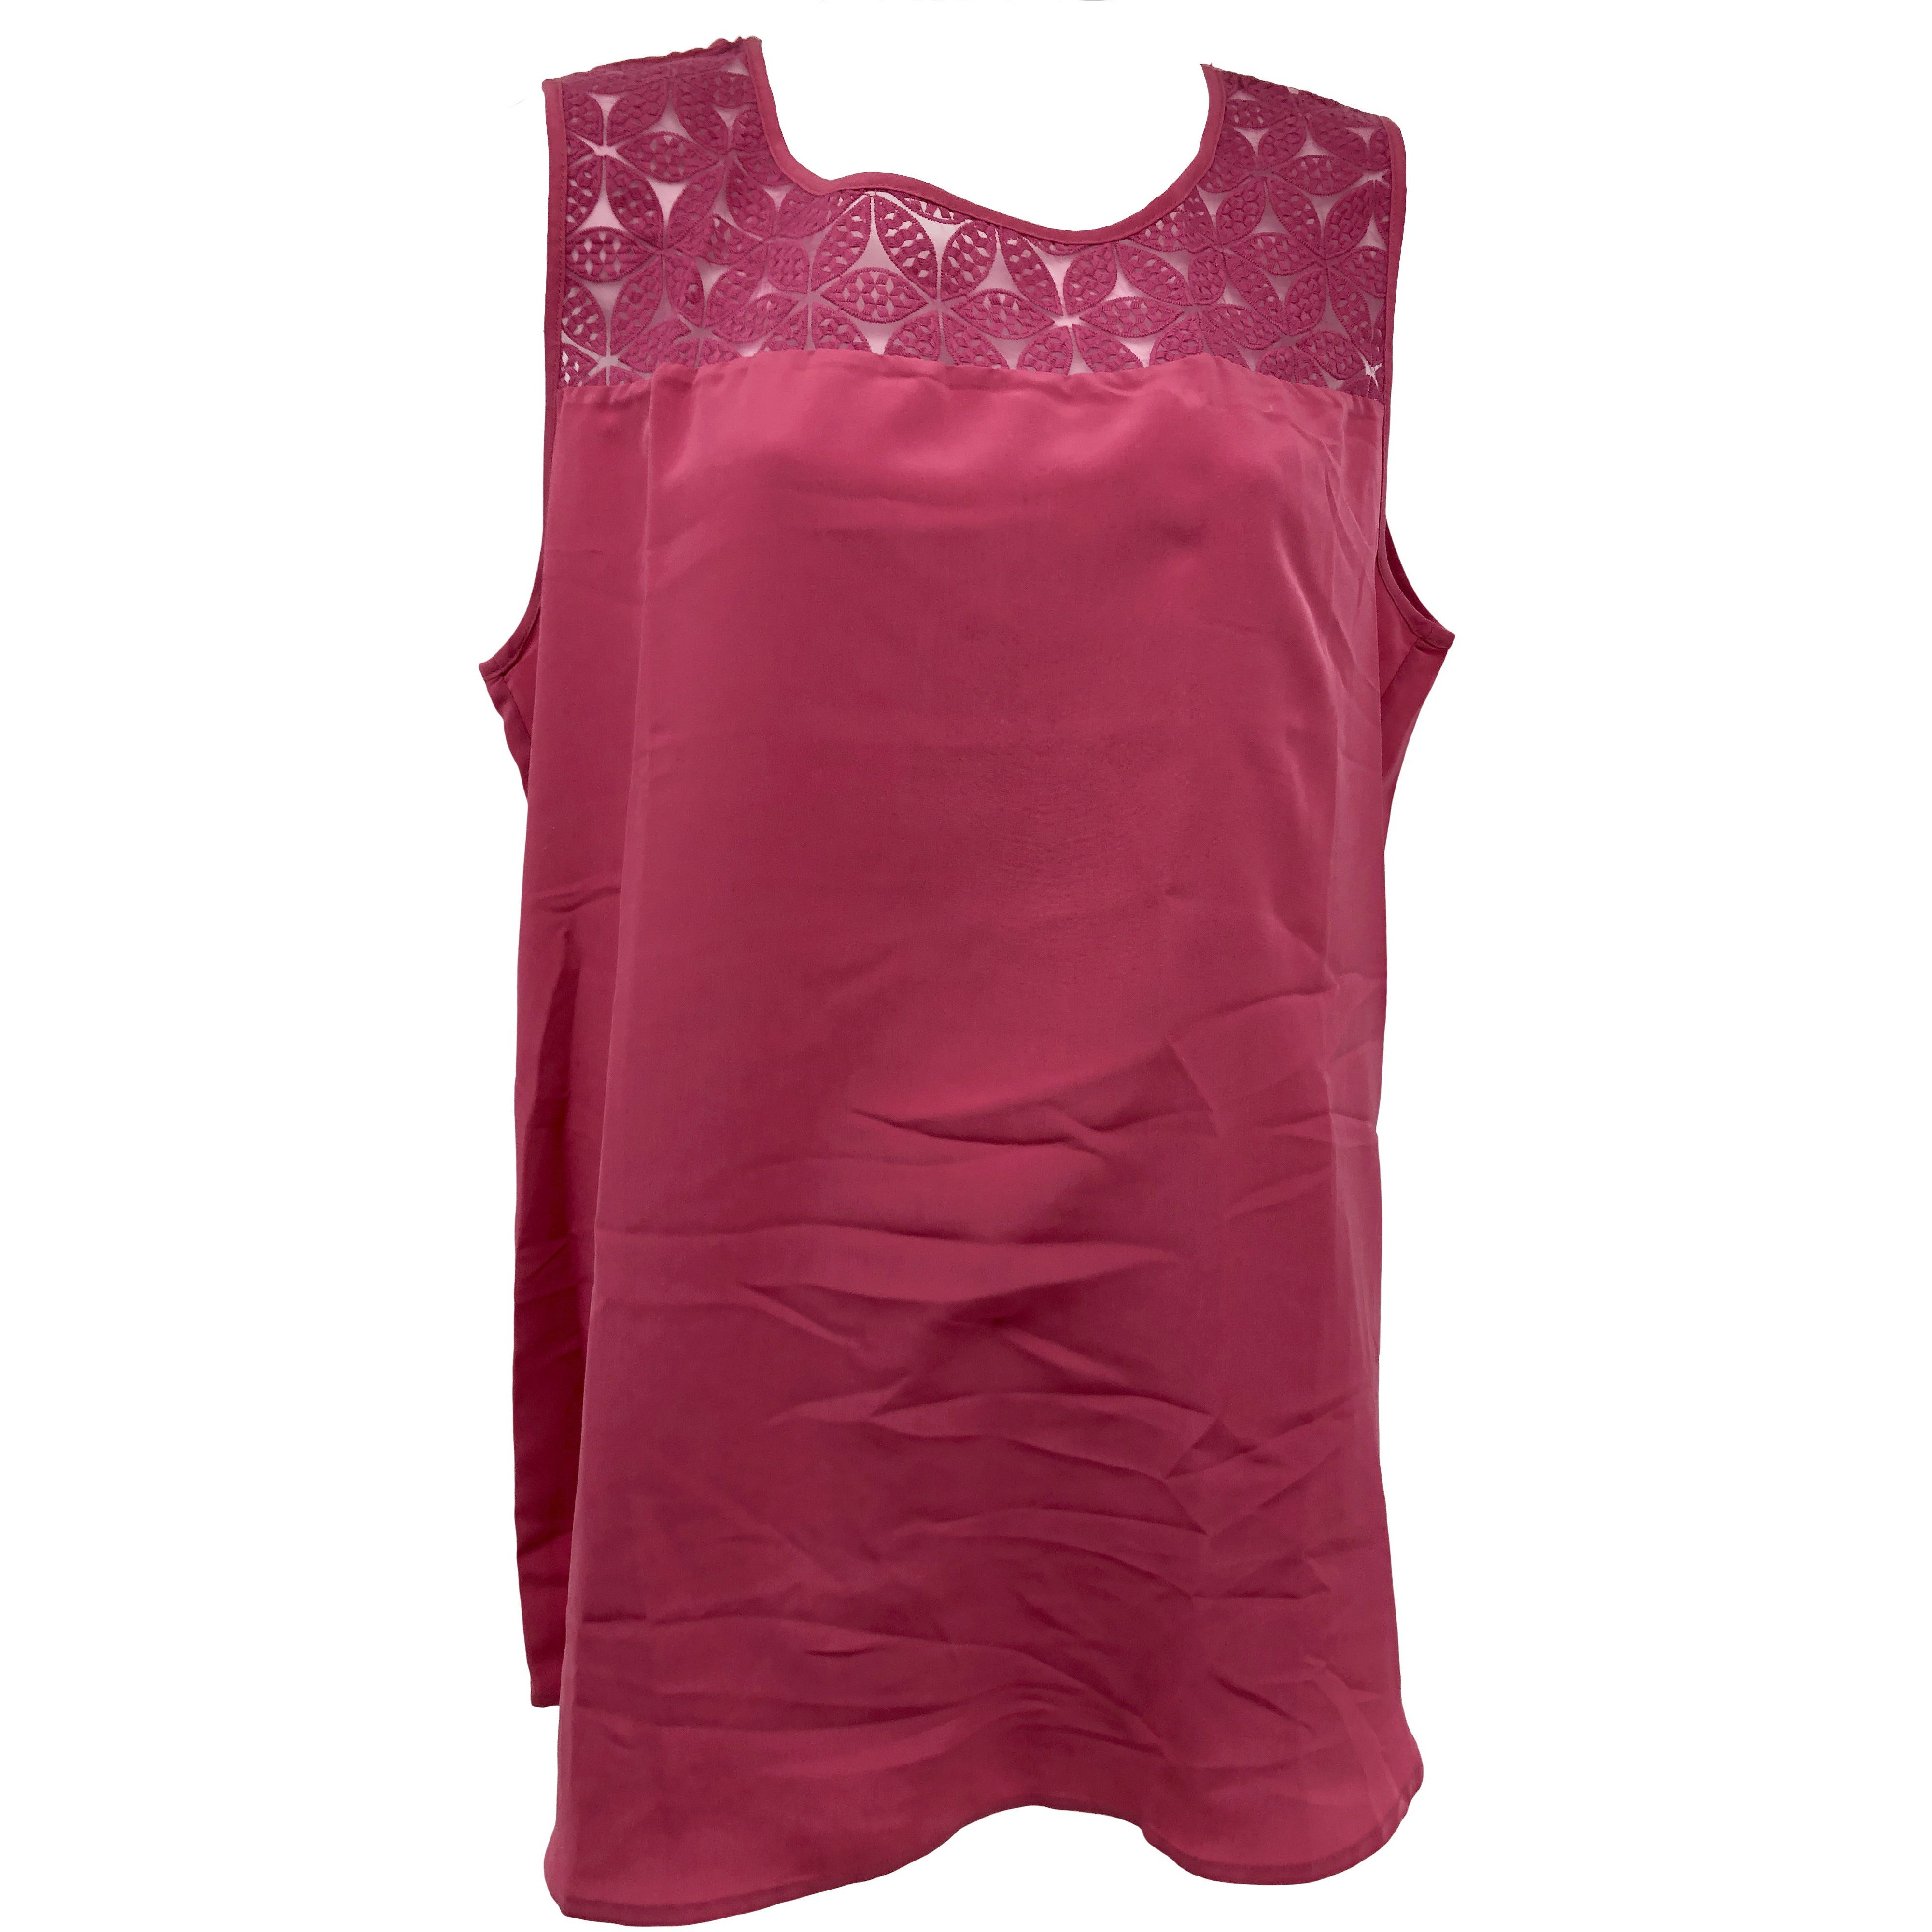 Nicole Miller Women's Sleeveless Top / Lace Collar Accent / Pink / Various Sizes